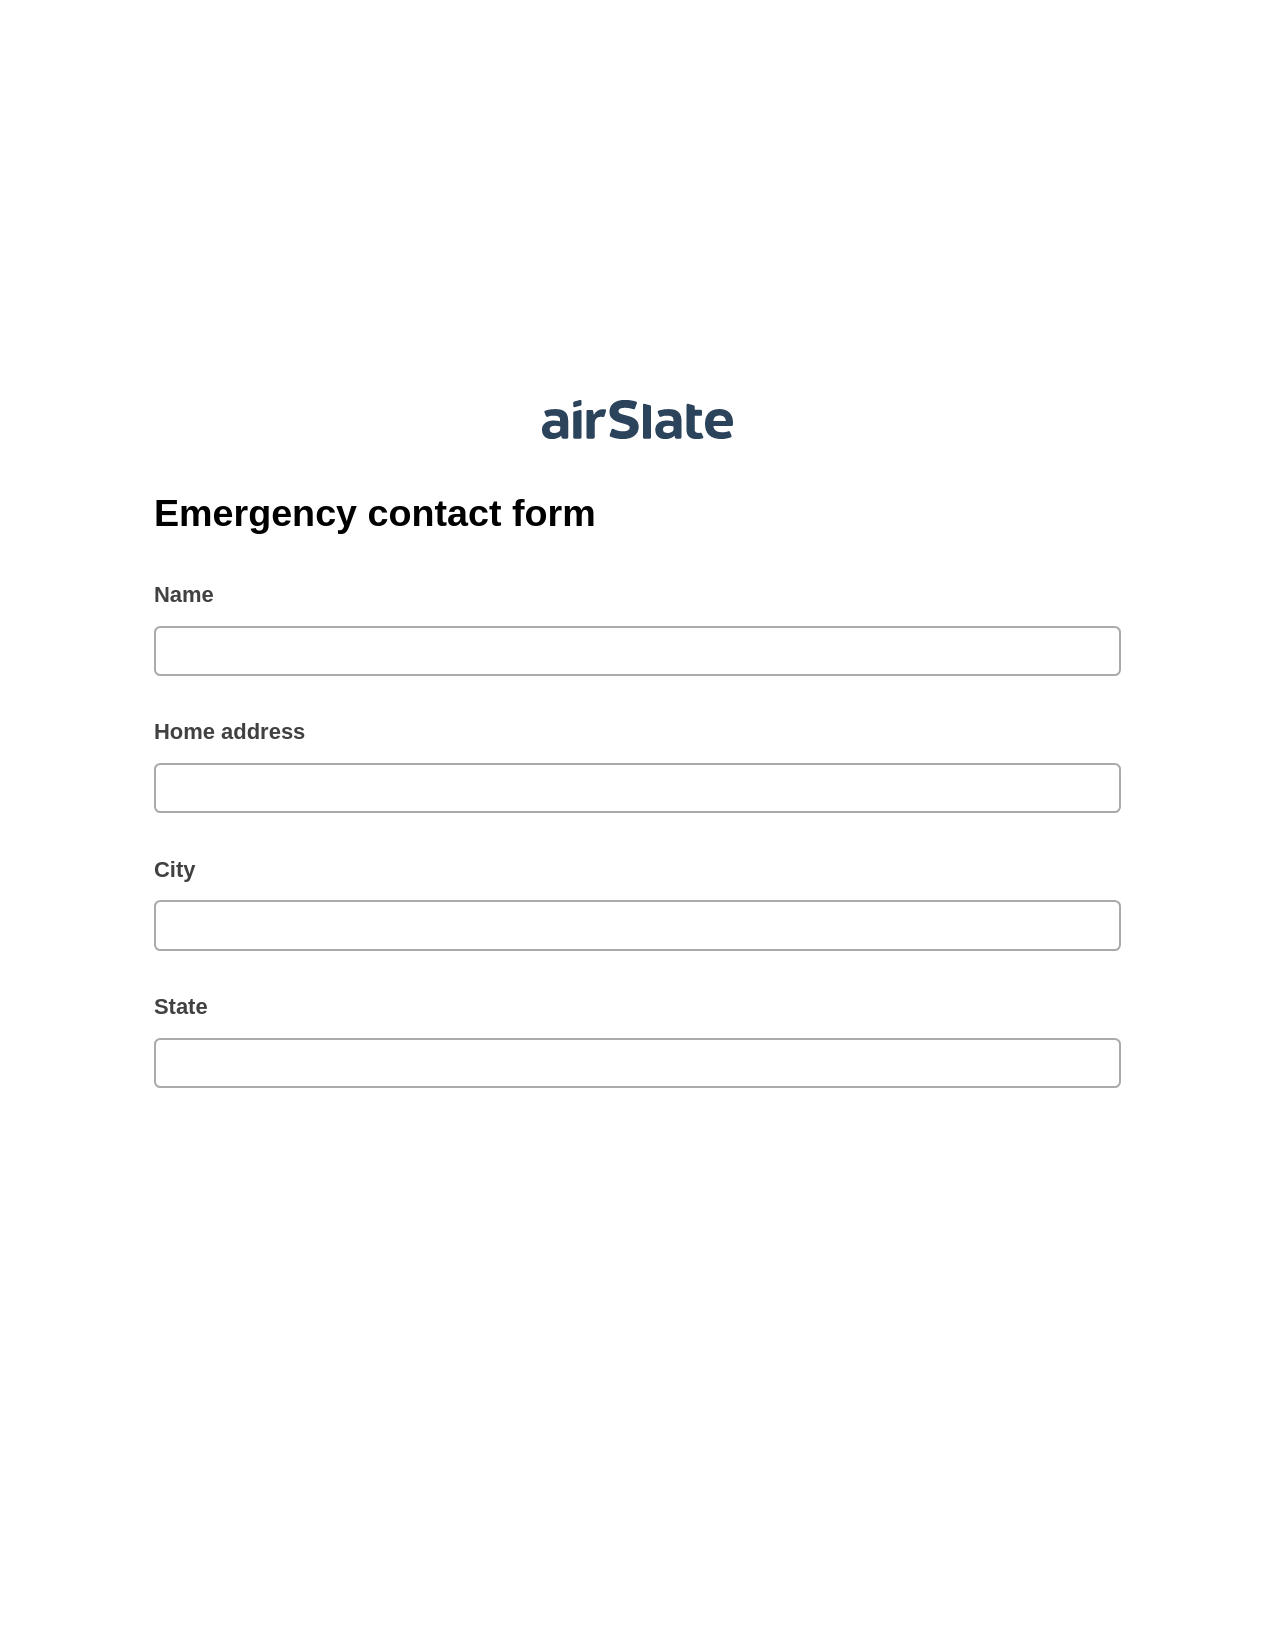 Emergency contact form Pre-fill from NetSuite Records Bot, Update Salesforce Record Bot, Archive to SharePoint Folder Bot